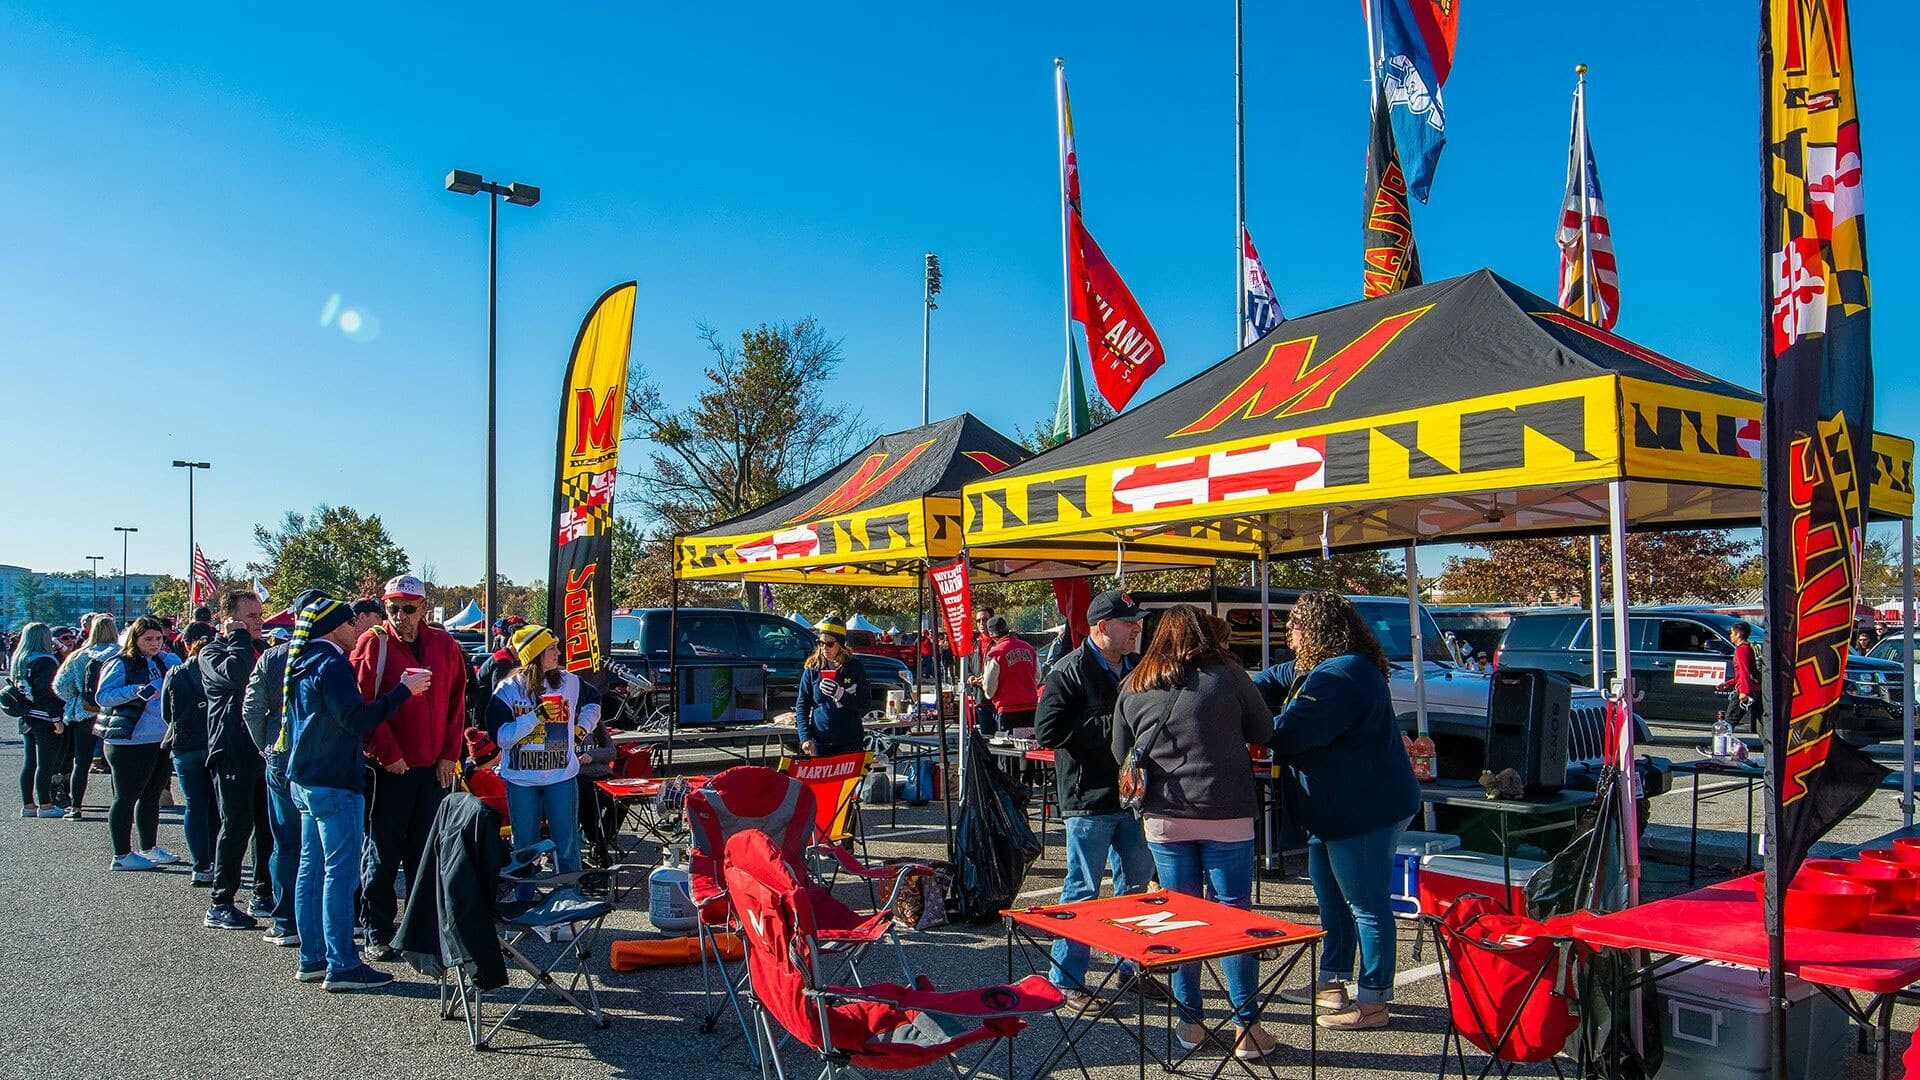 The University of Maryland's Homecoming tailgate.